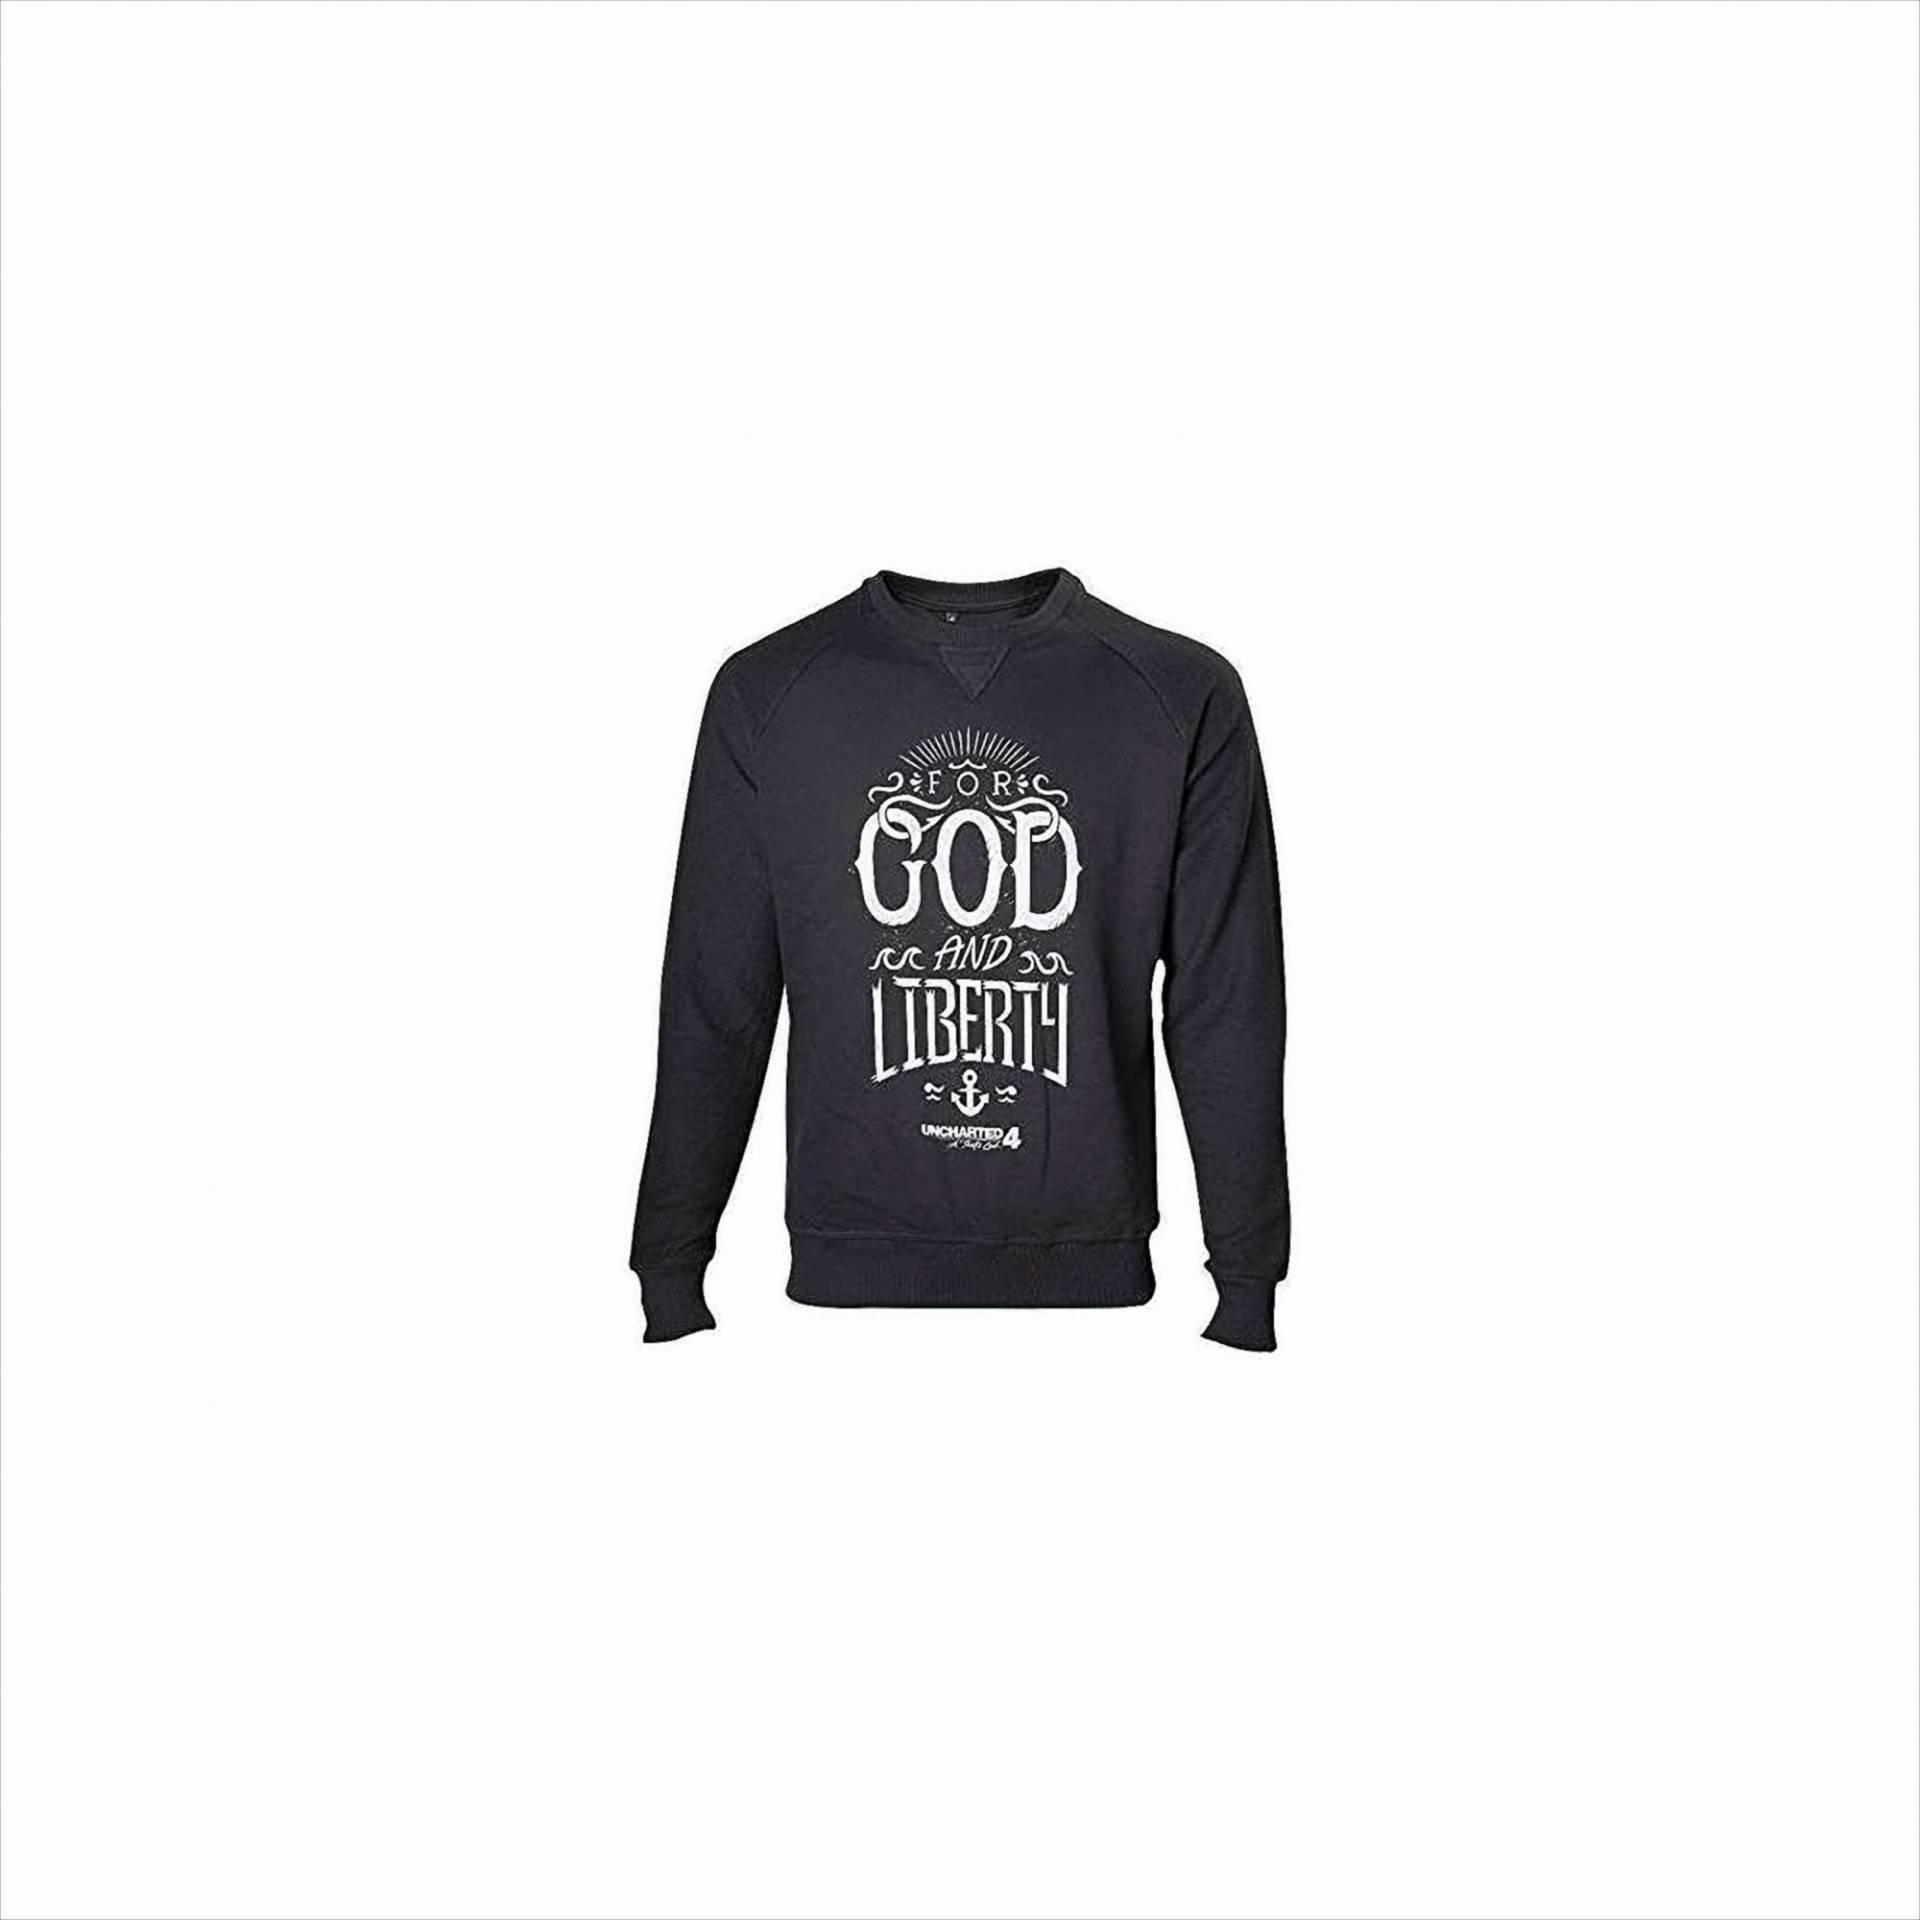 Uncharted 4 Pullover For God and Liberty L schwarz von Bioworld